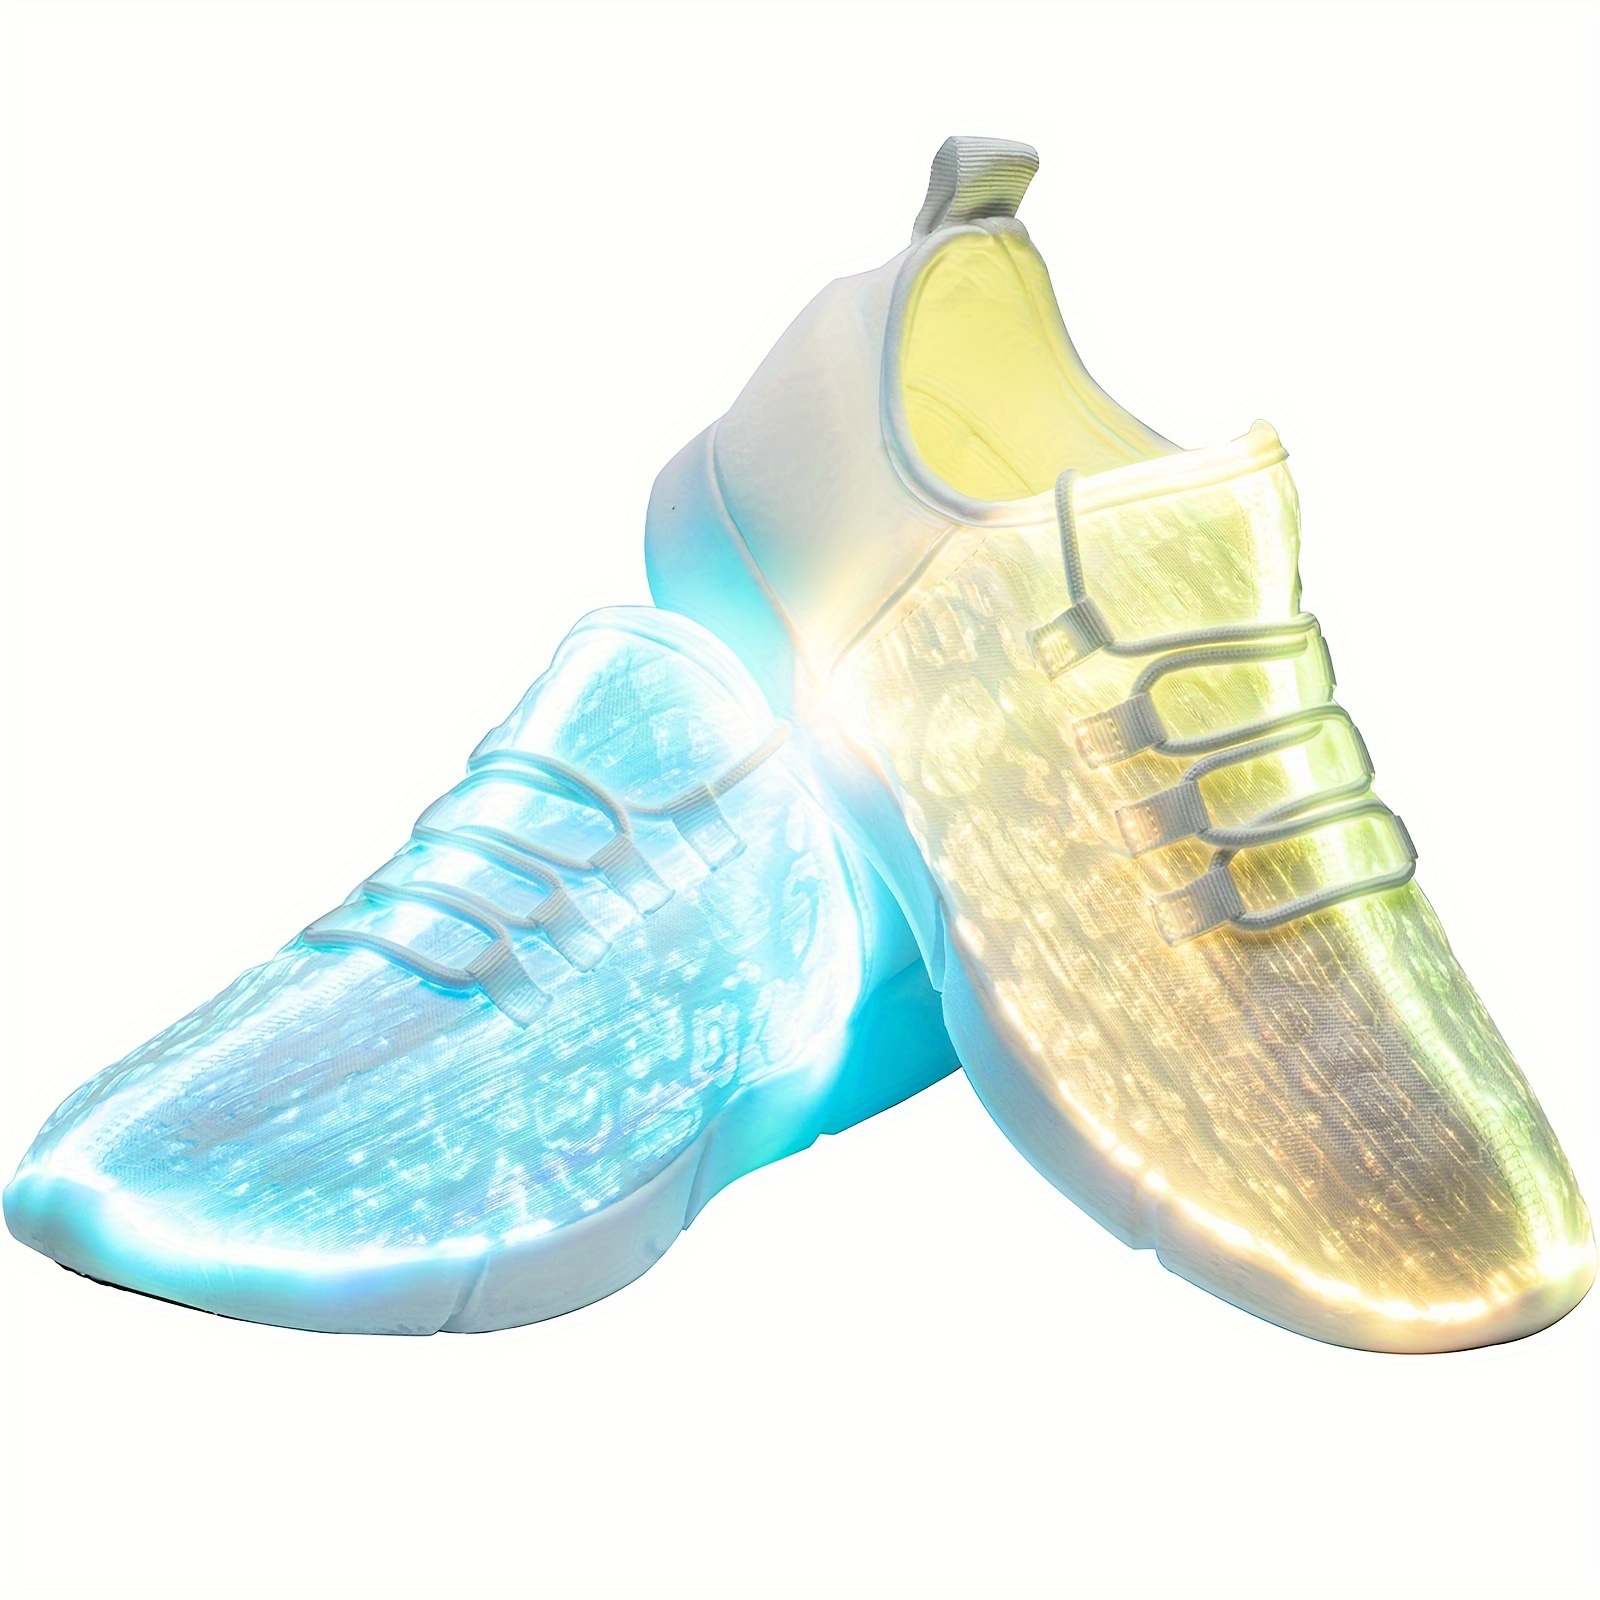 

Women's Fiber Optic Led Light Up Shoes With Charge Port, Stylish Breathable Low Top Sneakers, Suitable For Party, Dance, Halloween